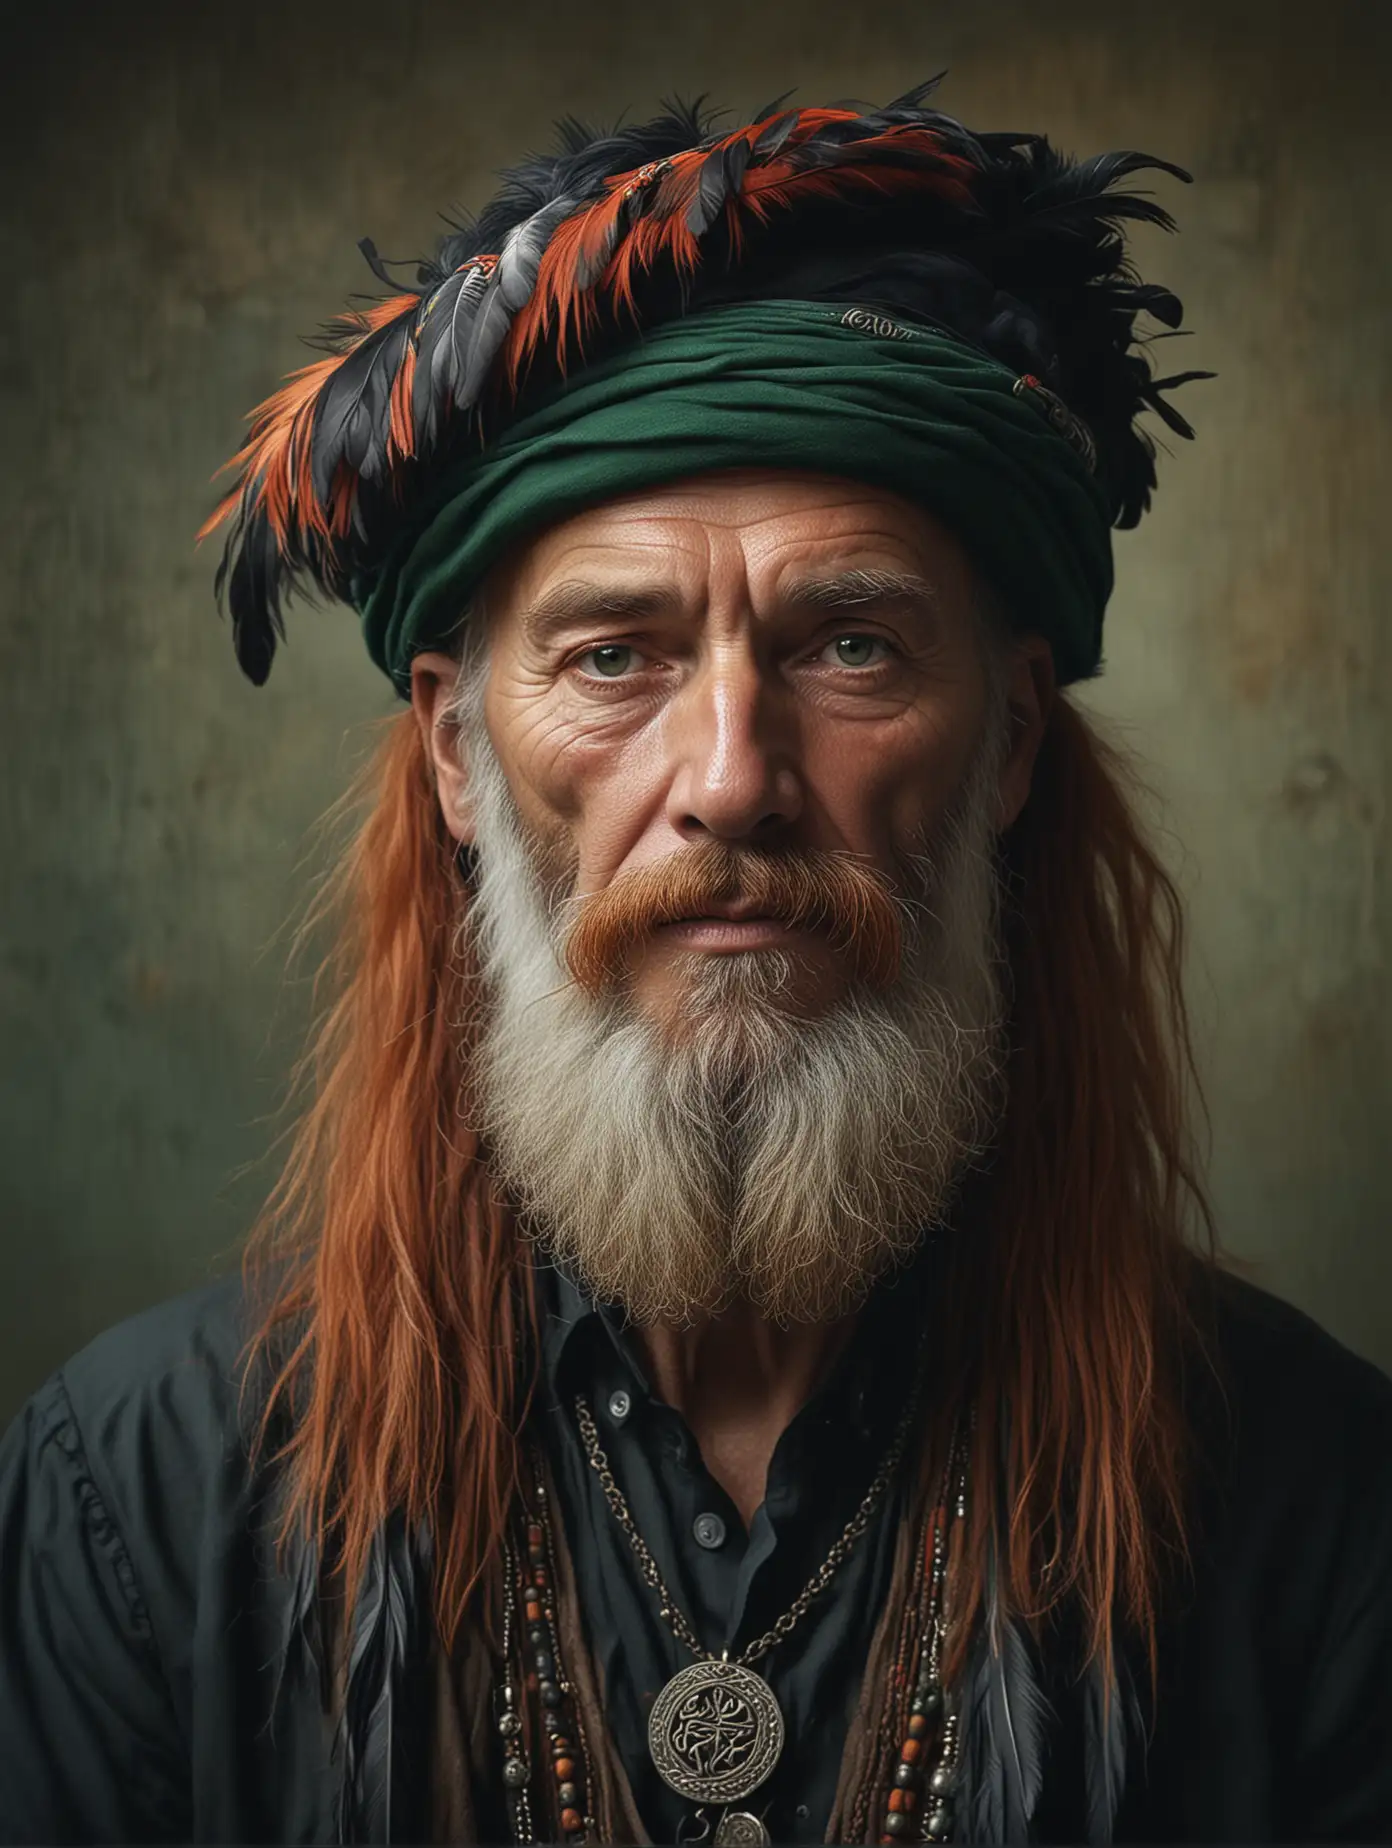 Johnnie Faa of Dunbar, Will Faa, "King of the Gypsies", 100 years of solitude, very old, proud, Scottish gypsy, with a long red beard and a dark green hat, black feathers, black clothes, tribal, celtic, necklaces,  a hyperrealistic painting inspired by Lee Jeffries, ZBrush Central Contest winner, hyperrealism, Steven McCurry portrait, photography Alexey Gurylev, Alessio Albi